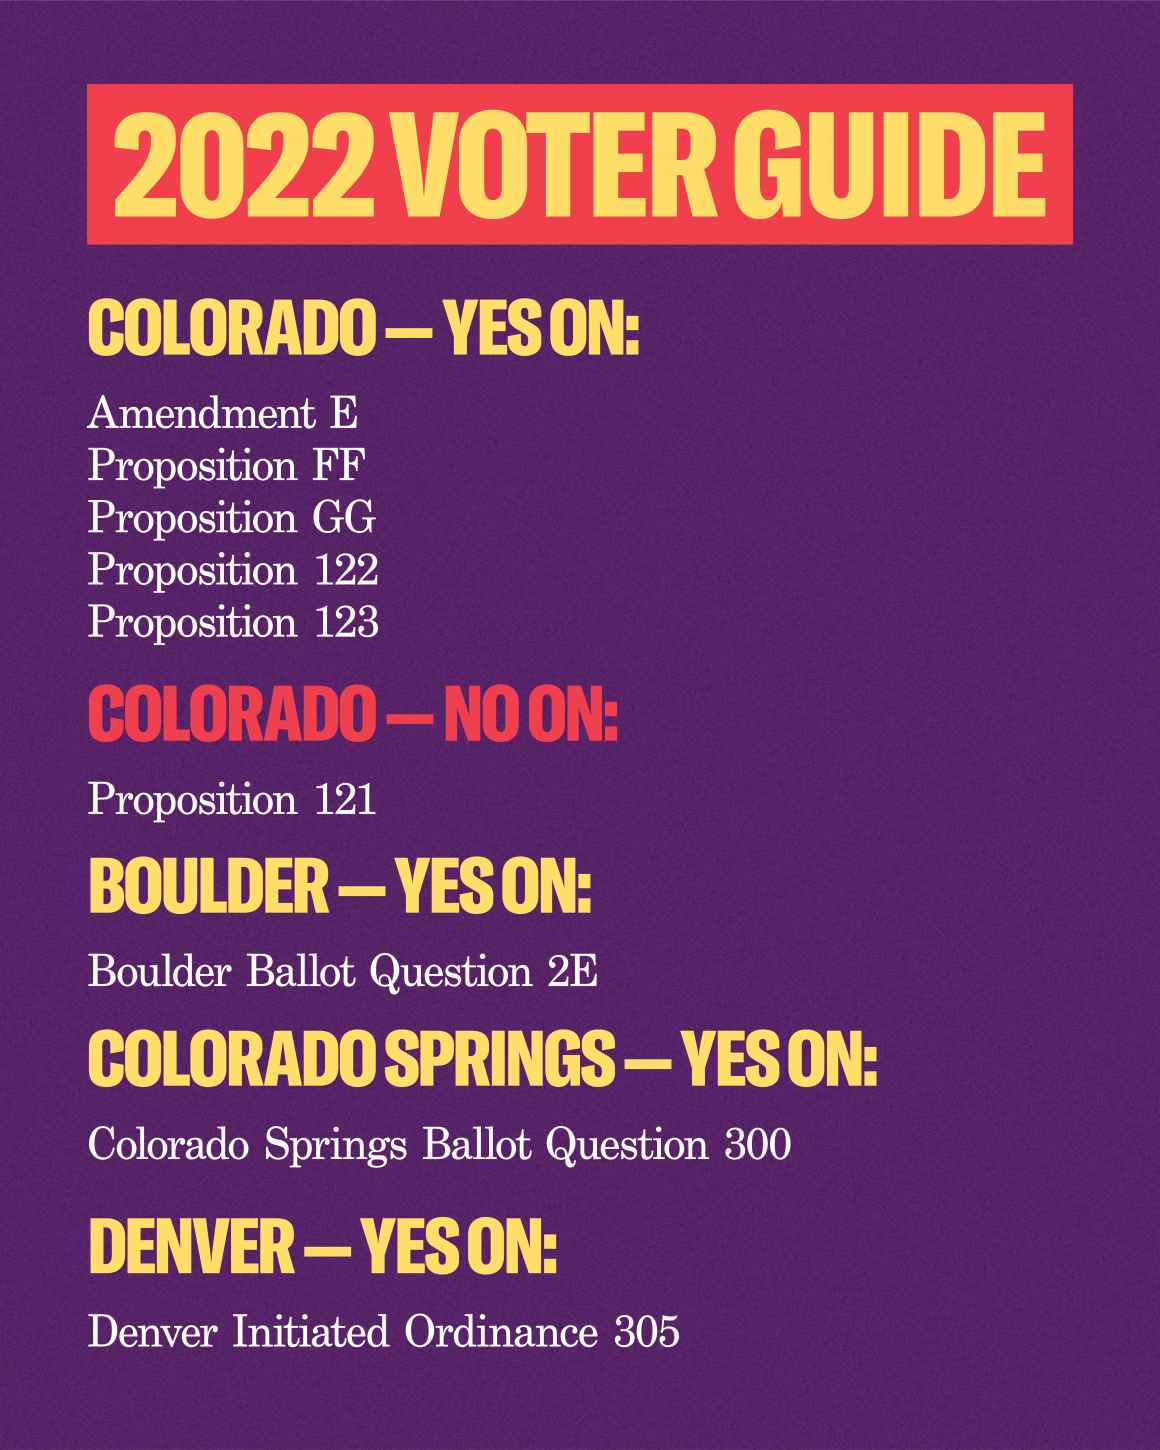 2022 voter guide title and list of ballot measures ACLU of Colorado supports and opposes